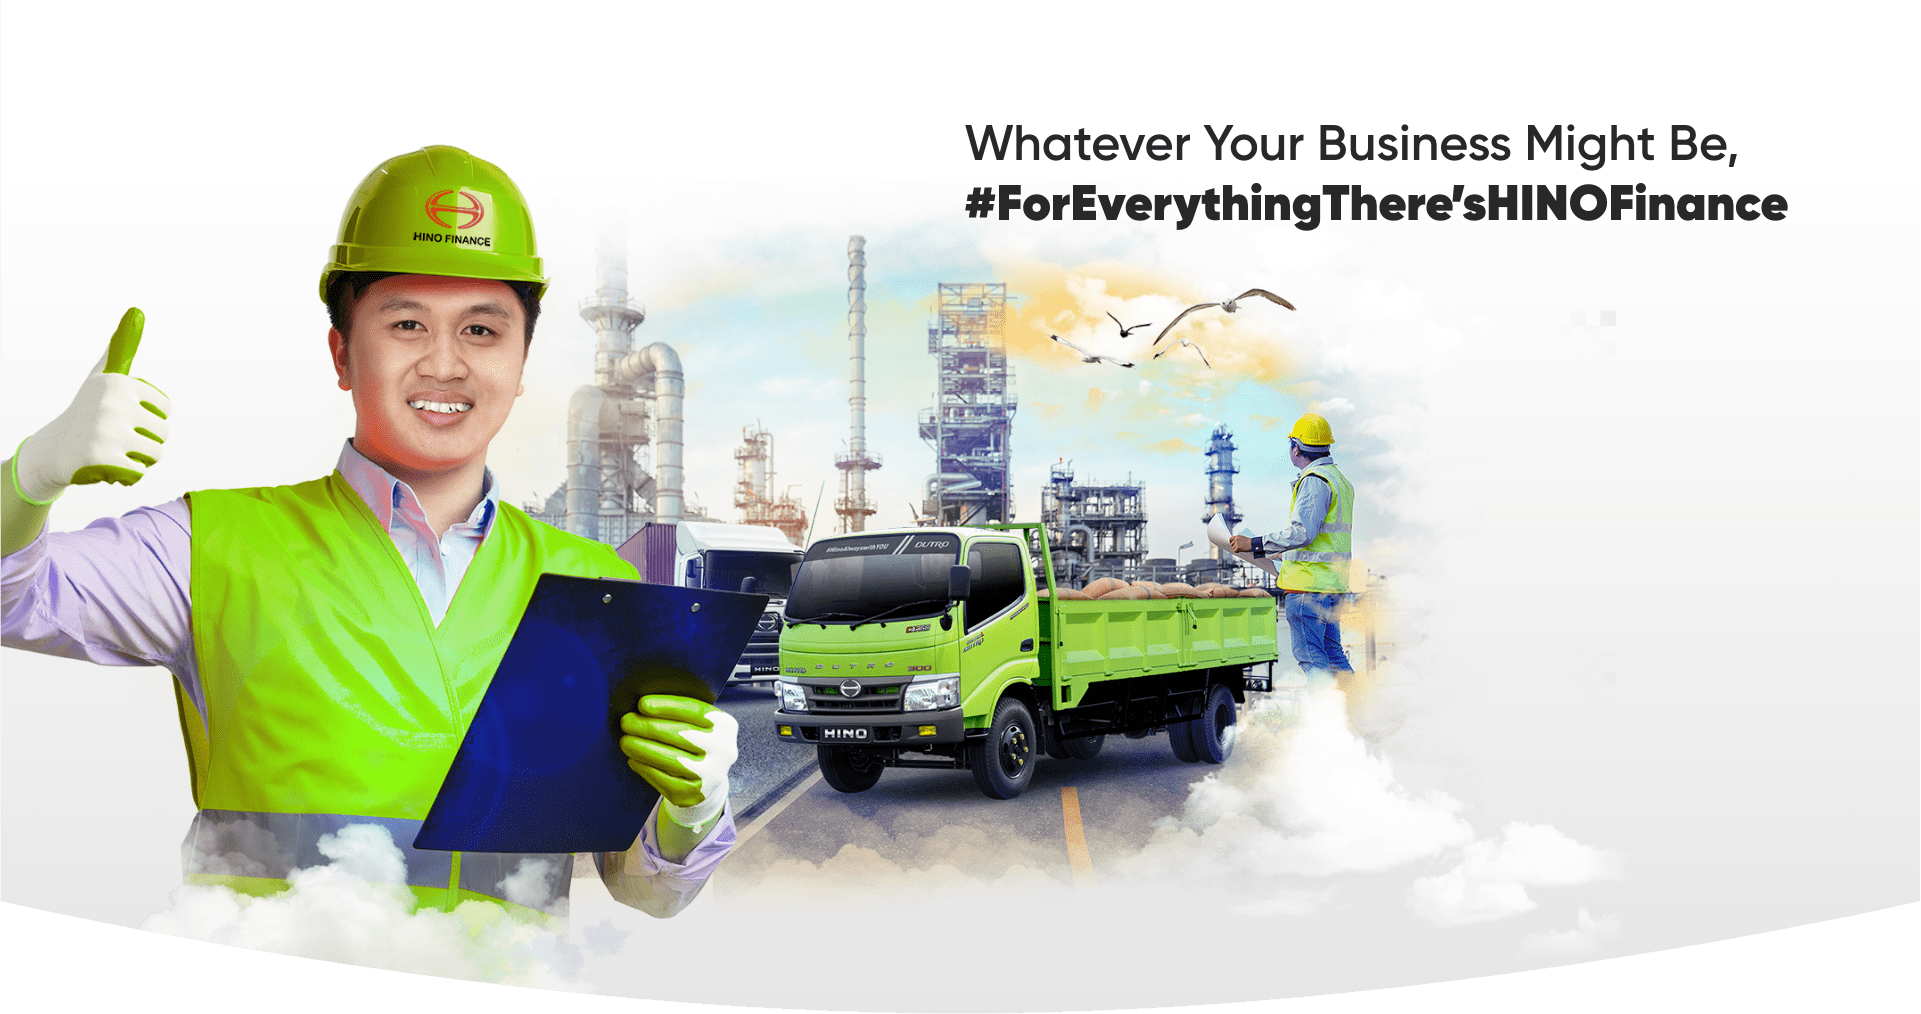 Whatever Your Business Might Be, #Foreverythingthere'sHINOfinance